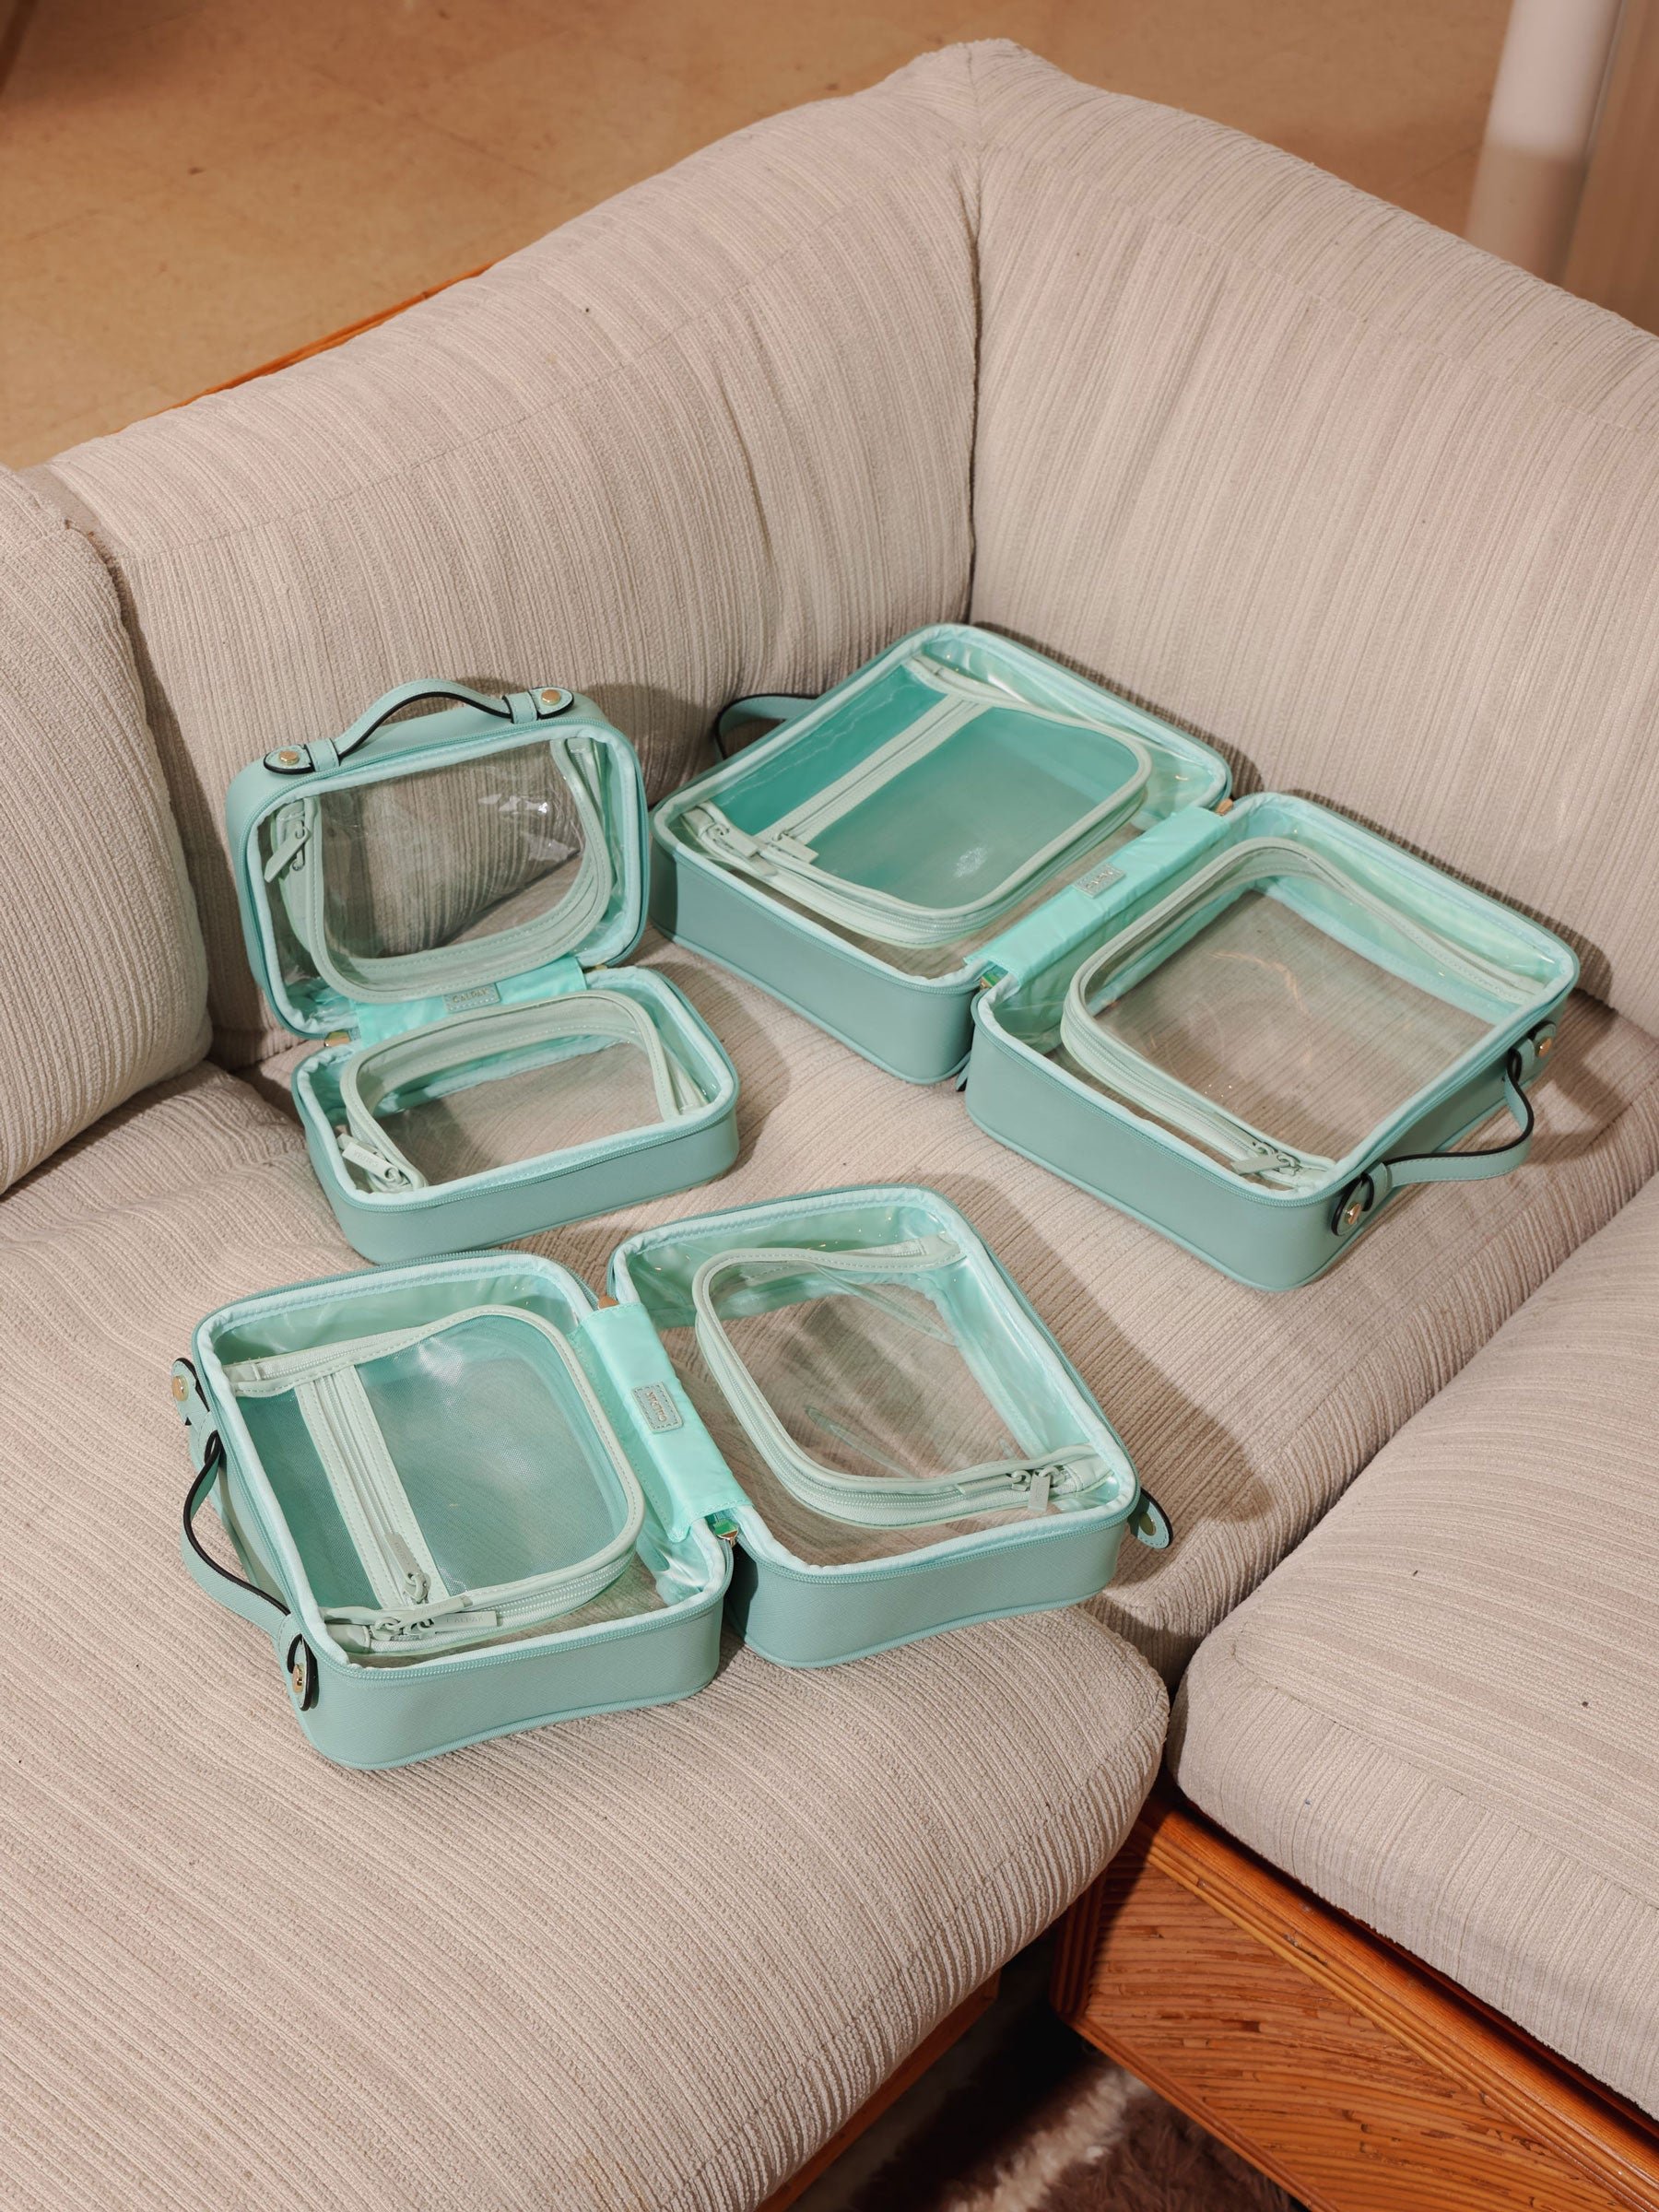 CALPAK aqua clear makeup cases with zippered compartments in small, medium and large sizes